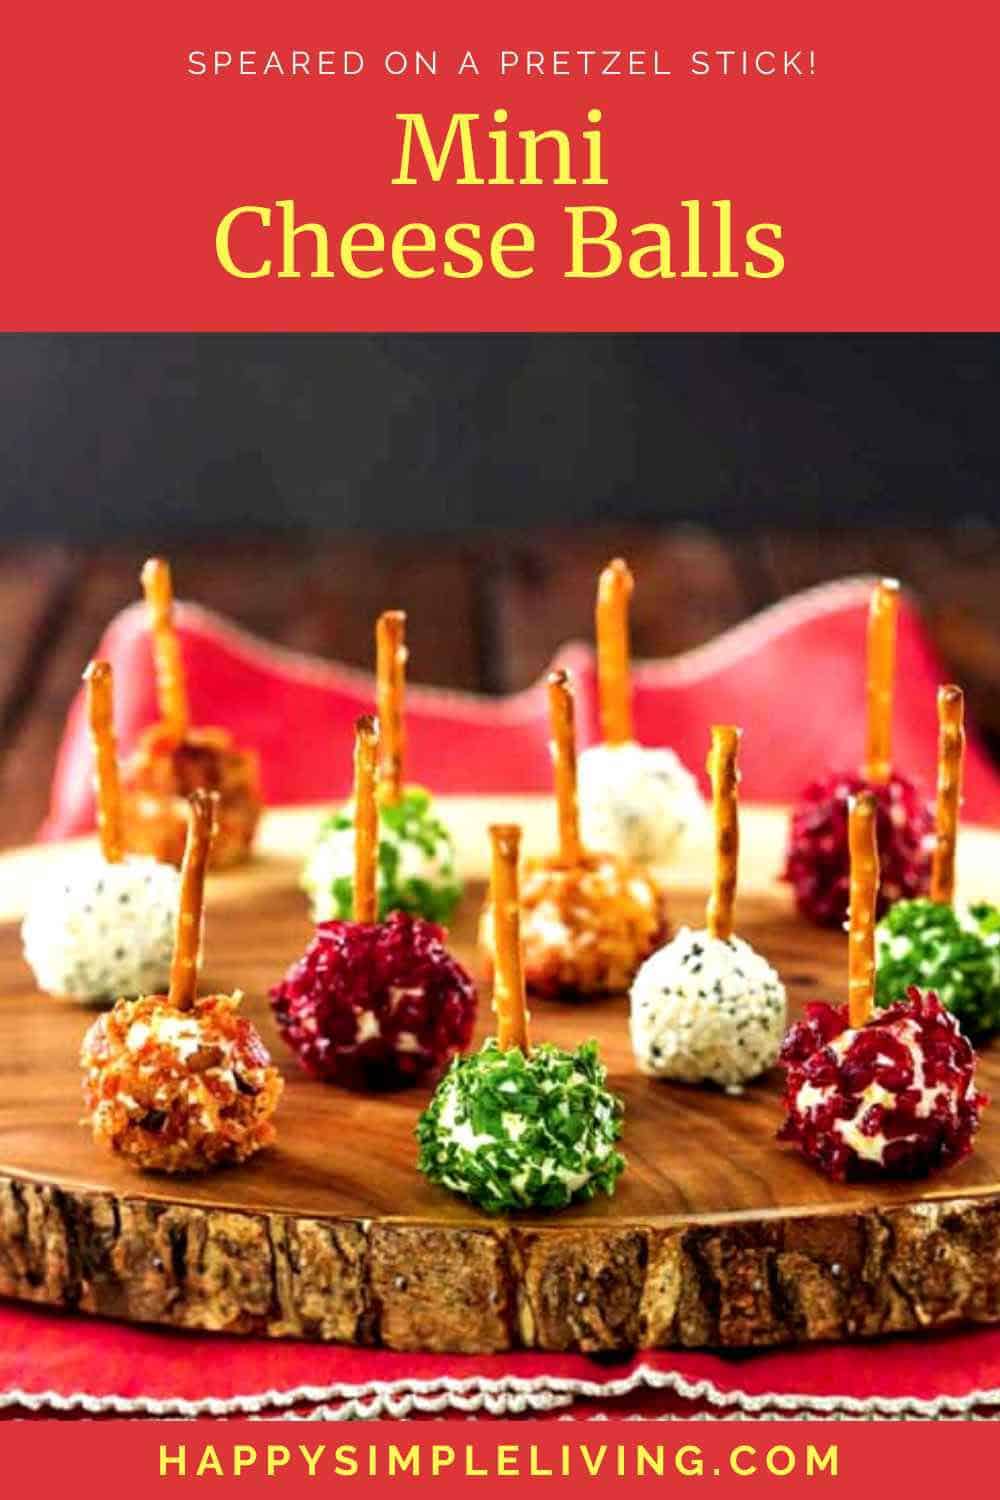 Mini cheese balls speared with pretzel sticks, served on a wooden platter.